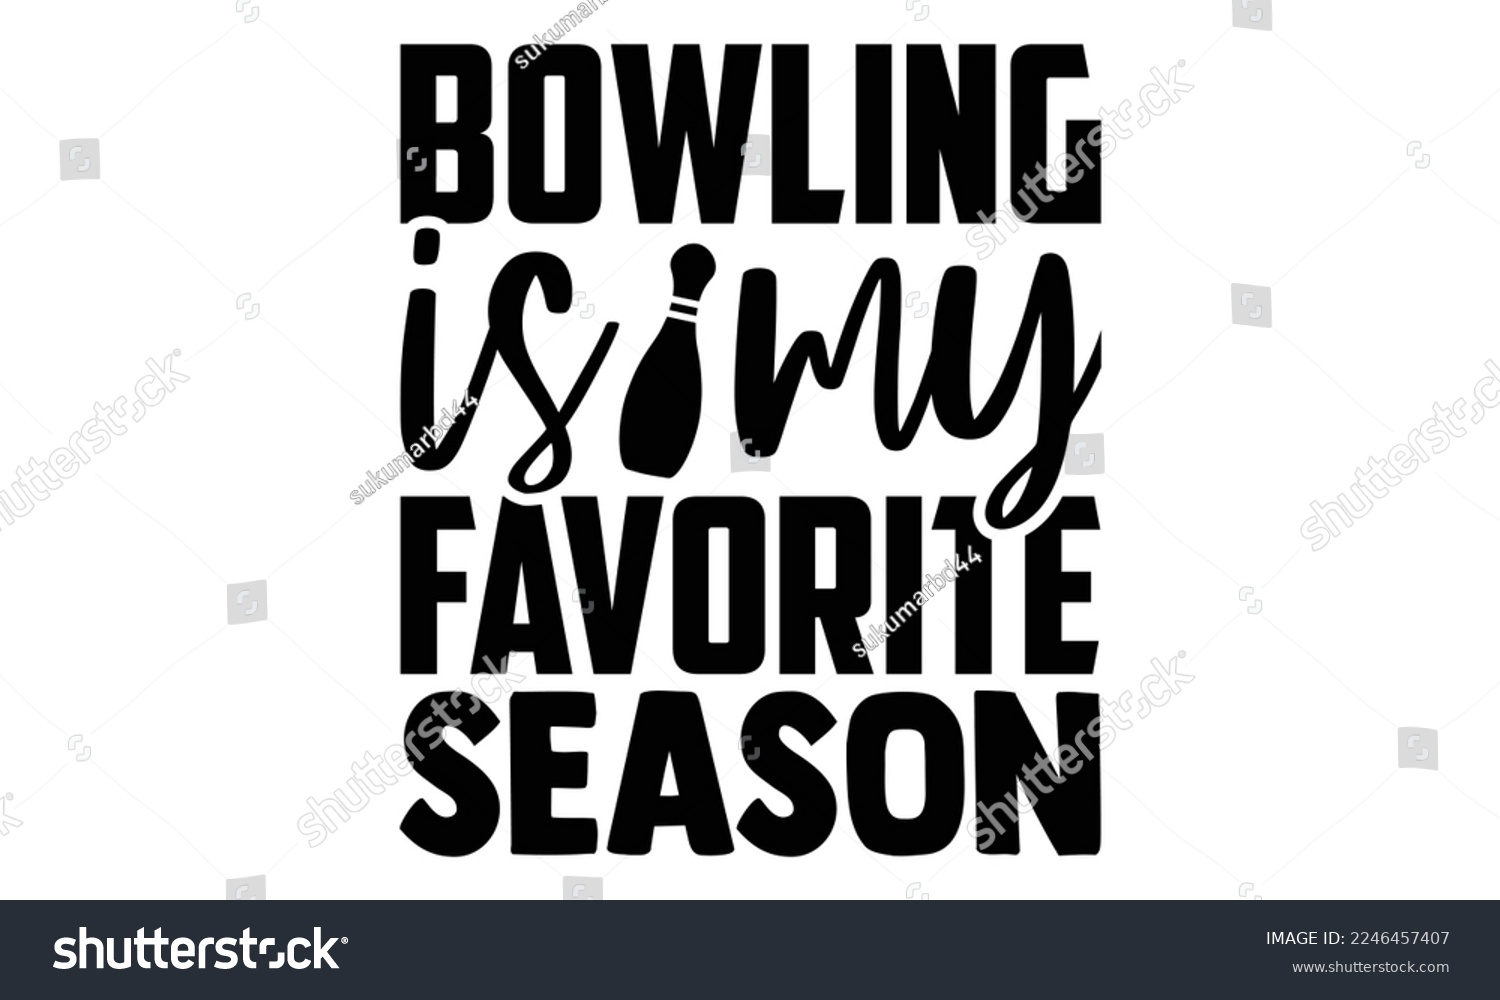 SVG of Bowling Is My Favorite Season - Bowling T-shirt Design, Illustration for prints on bags, posters, cards, mugs, svg for Cutting Machine, Silhouette Cameo, Hand drawn lettering phrase. svg